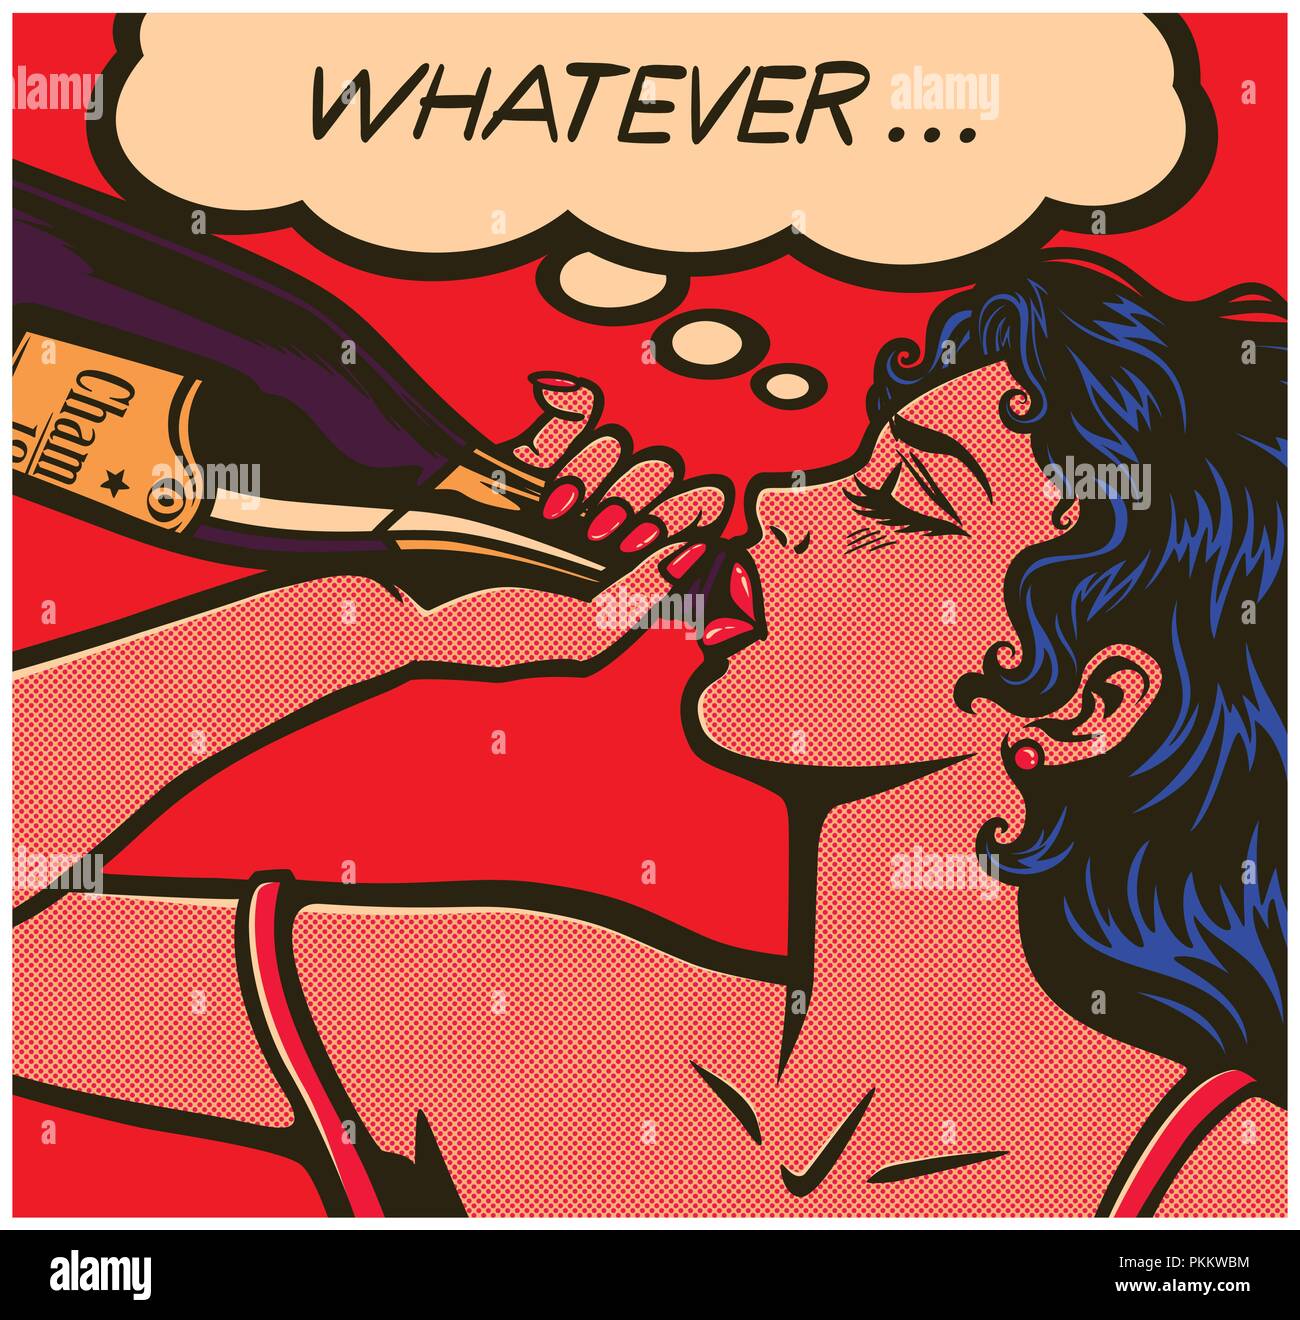 Pop art comic book careless desperate girl binge drinking to forget problems champagne bottle alcohol abuse vector illustration Stock Vector